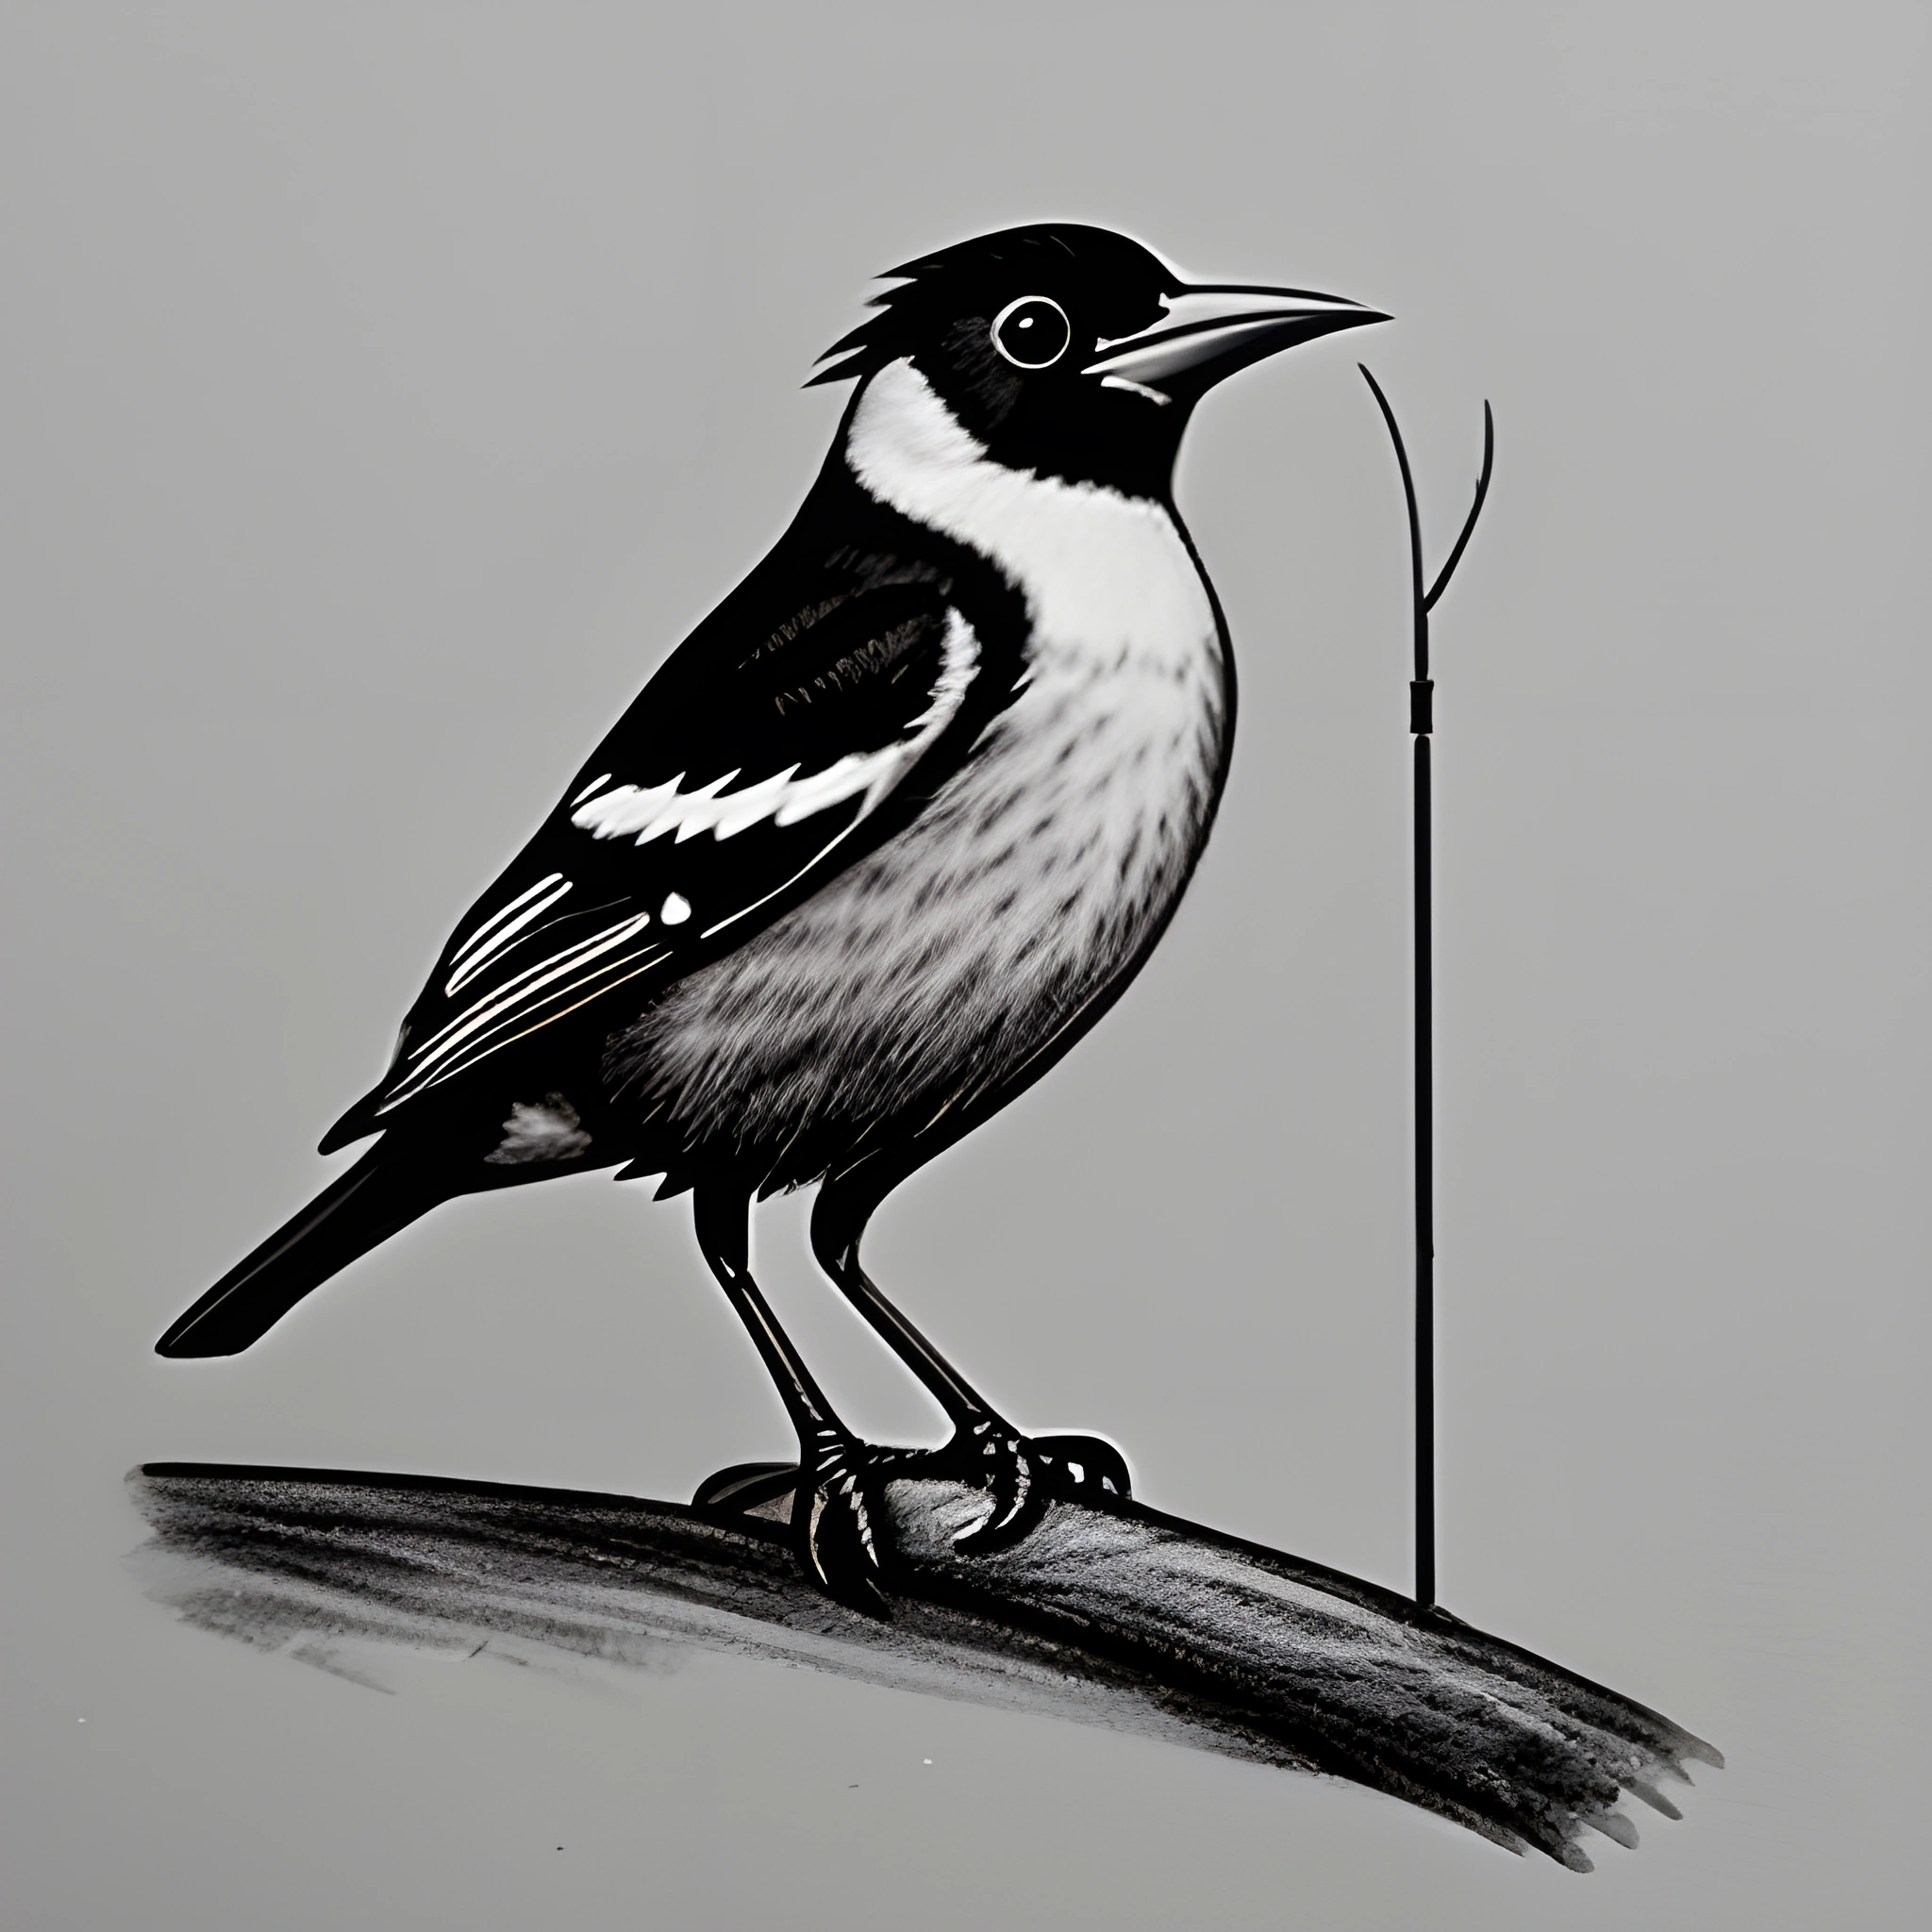 drawing of a bird with a worm in its beak